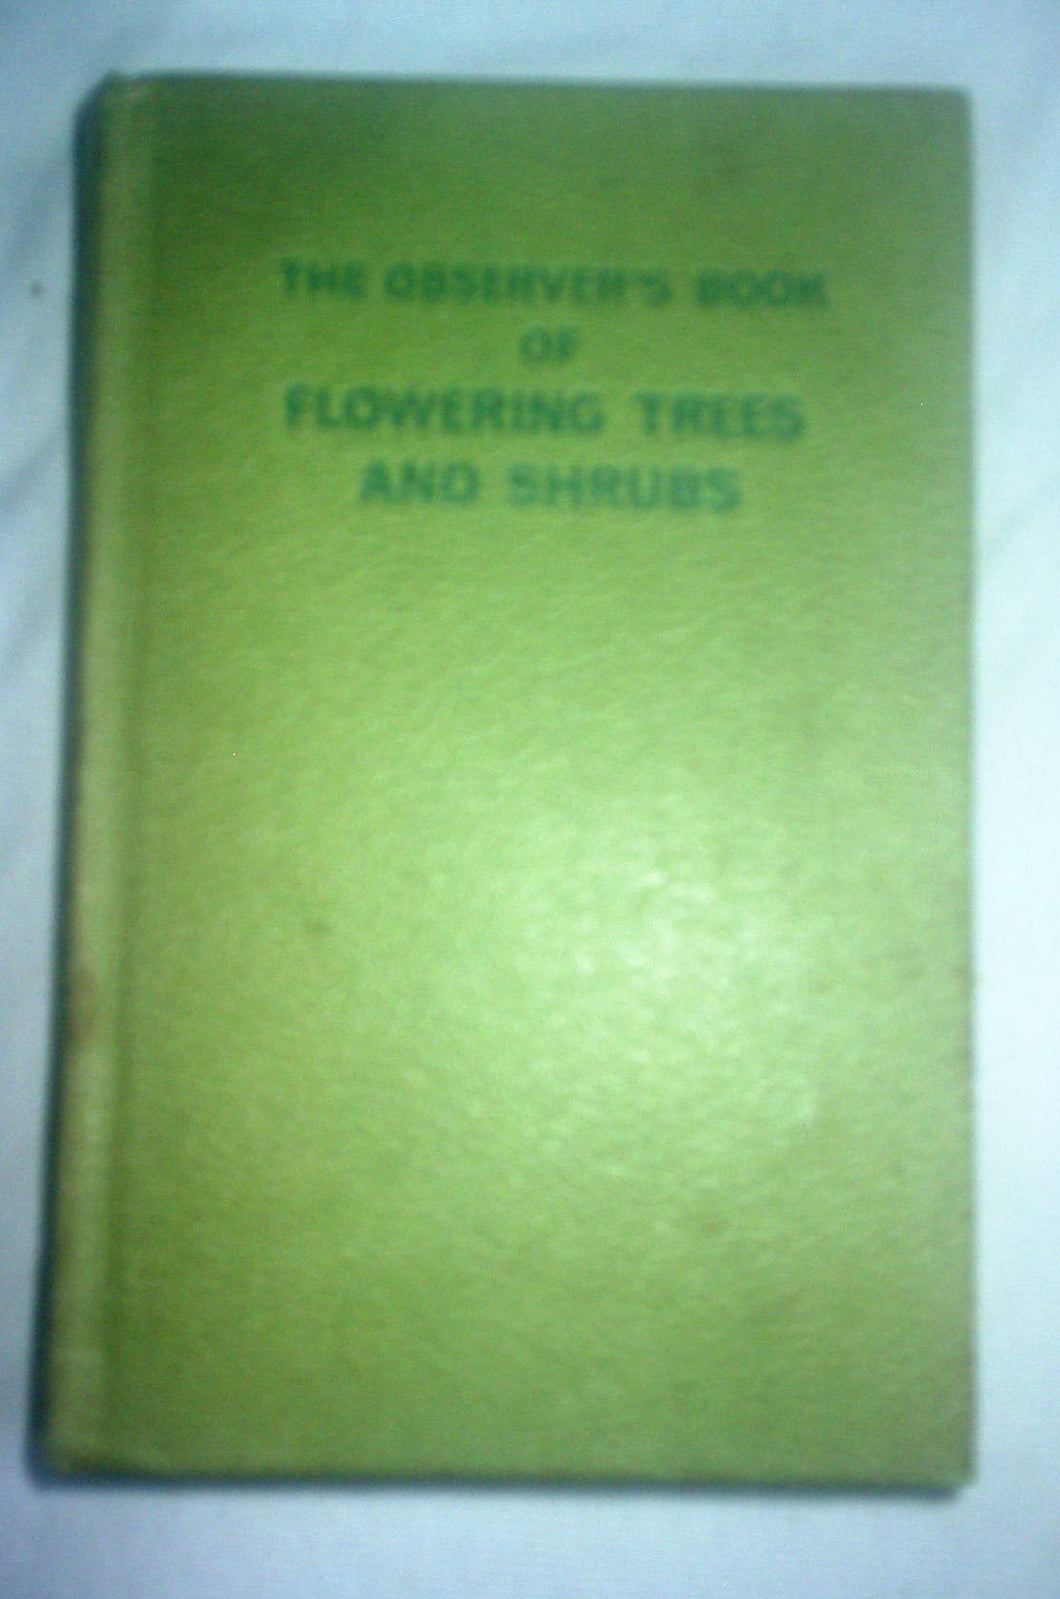 Book of Flowering Trees and Shrubs for Gardens (Observer's Pocket) by Stanley B. Whitehead (1972-05-18) [Hardcover] Stanley B. Whitehead